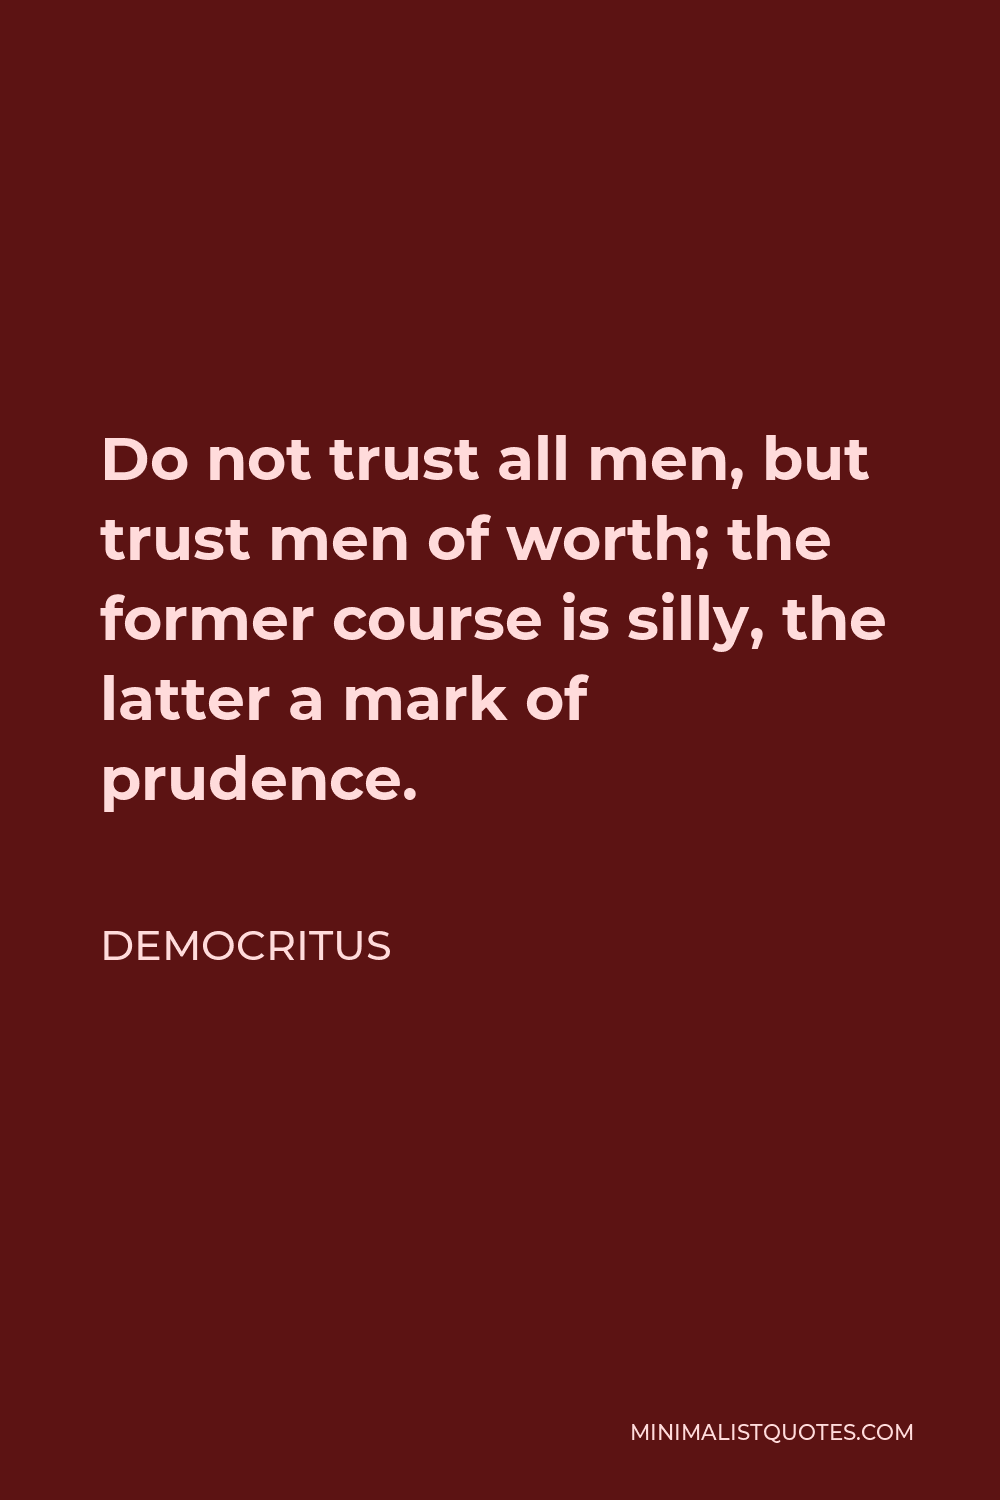 Democritus Quote - Do not trust all men, but trust men of worth; the former course is silly, the latter a mark of prudence.